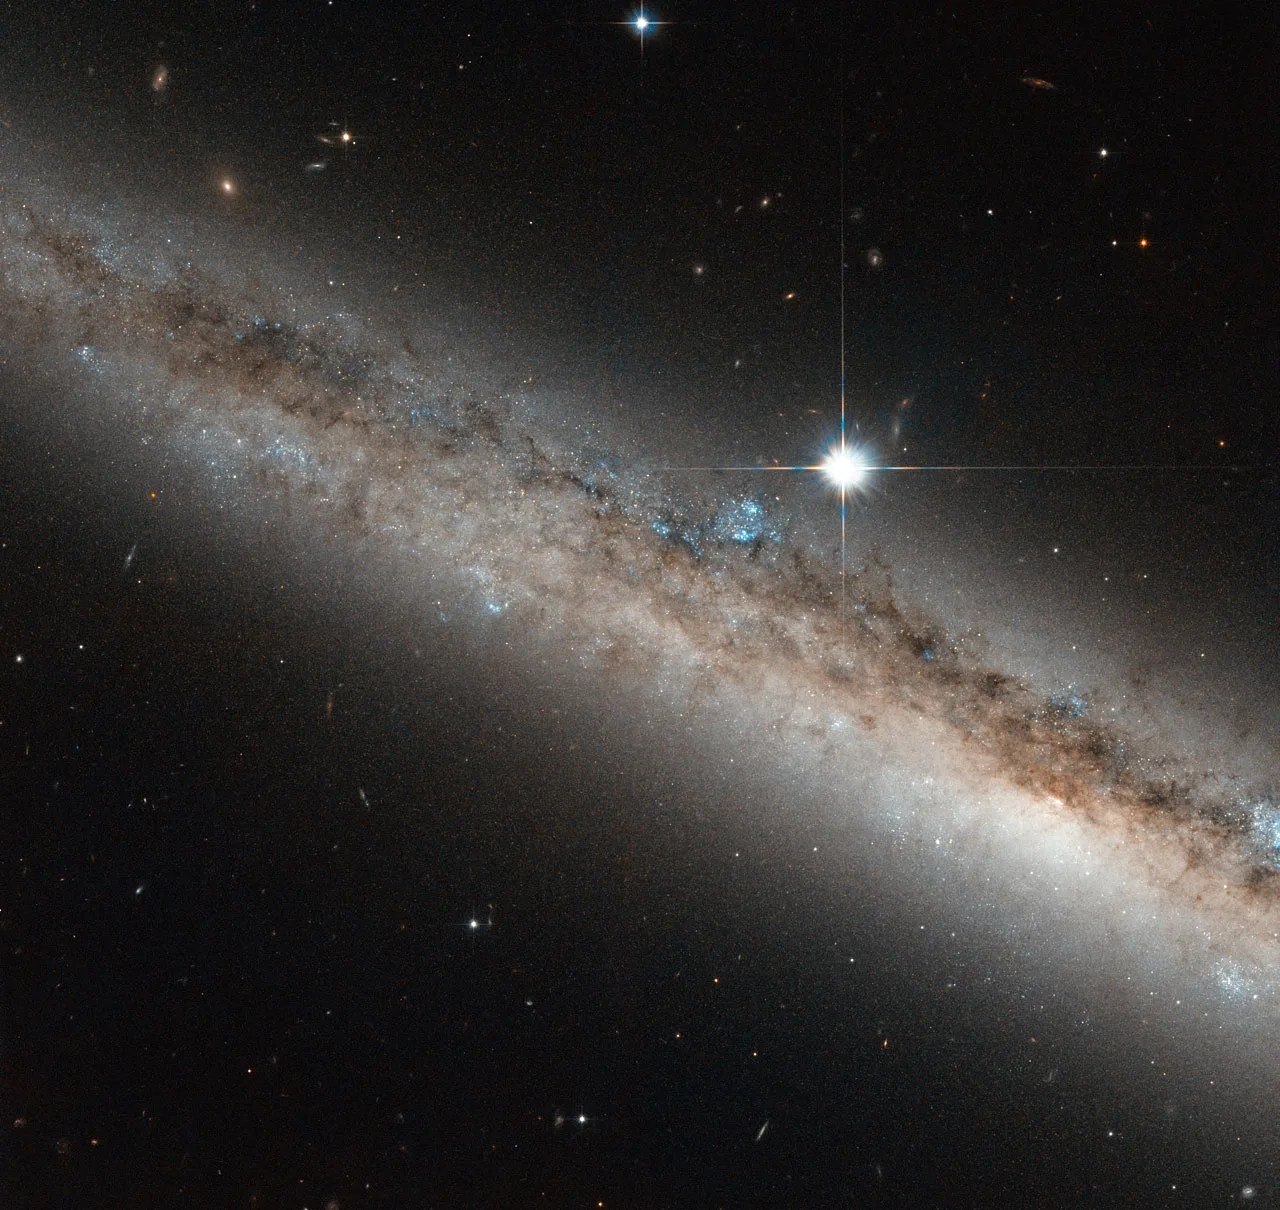 Edge on view of a galaxy angled down to the right, with a bright star above